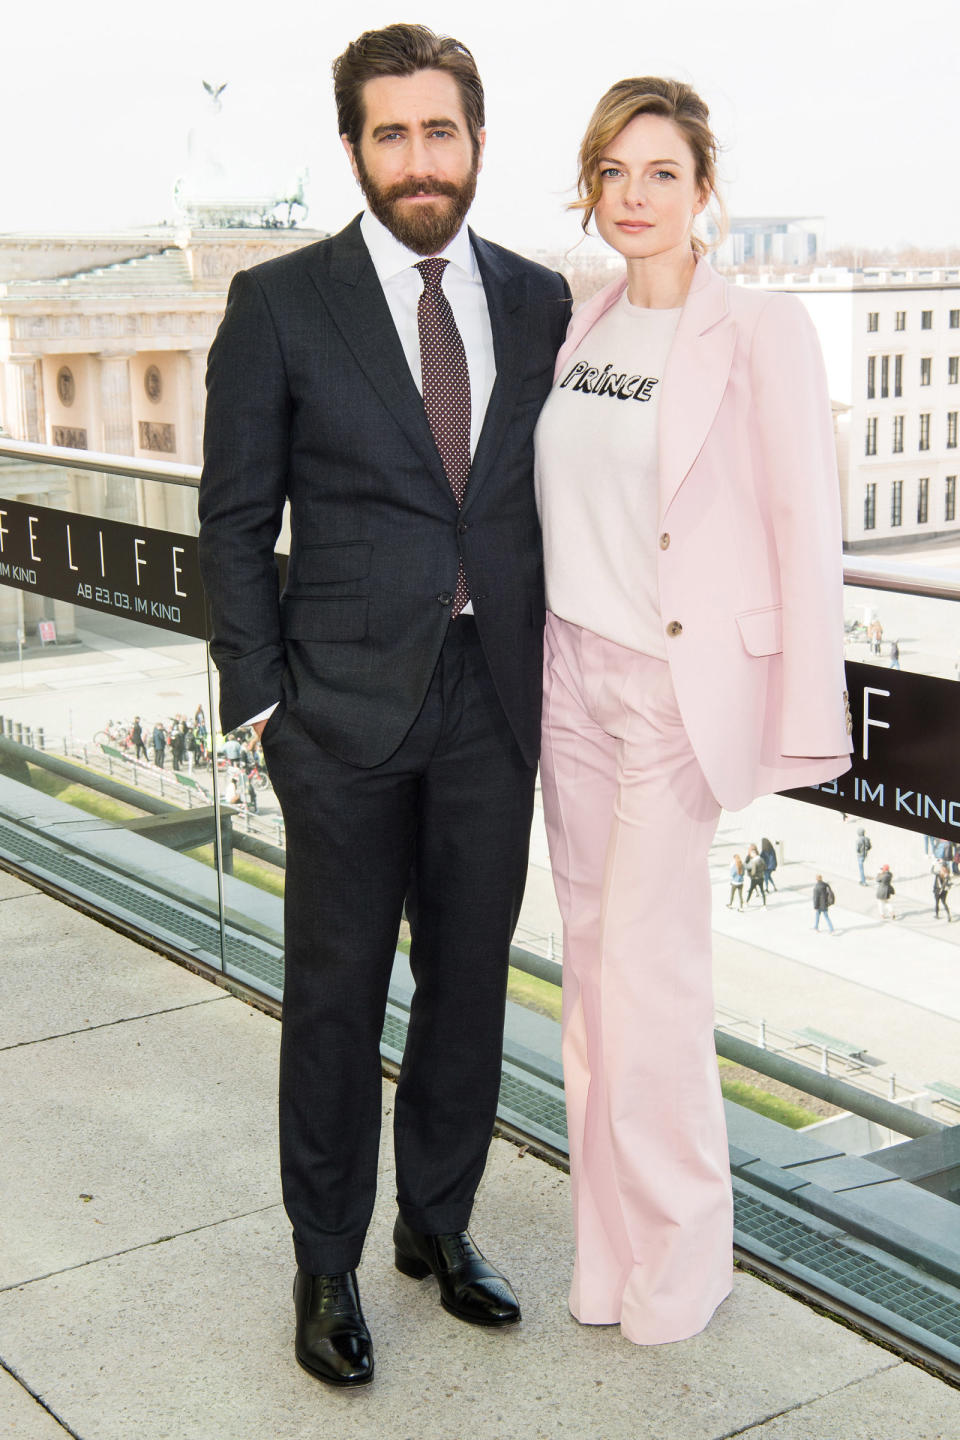 <p><strong>14 March</strong> Jake Gyllenhaal wore a sharp grey suit as he posed with his co-star Rebecca Ferguson – who looked pretty in pink – at a photo call in Berlin for the new film <em>Life</em>.</p>